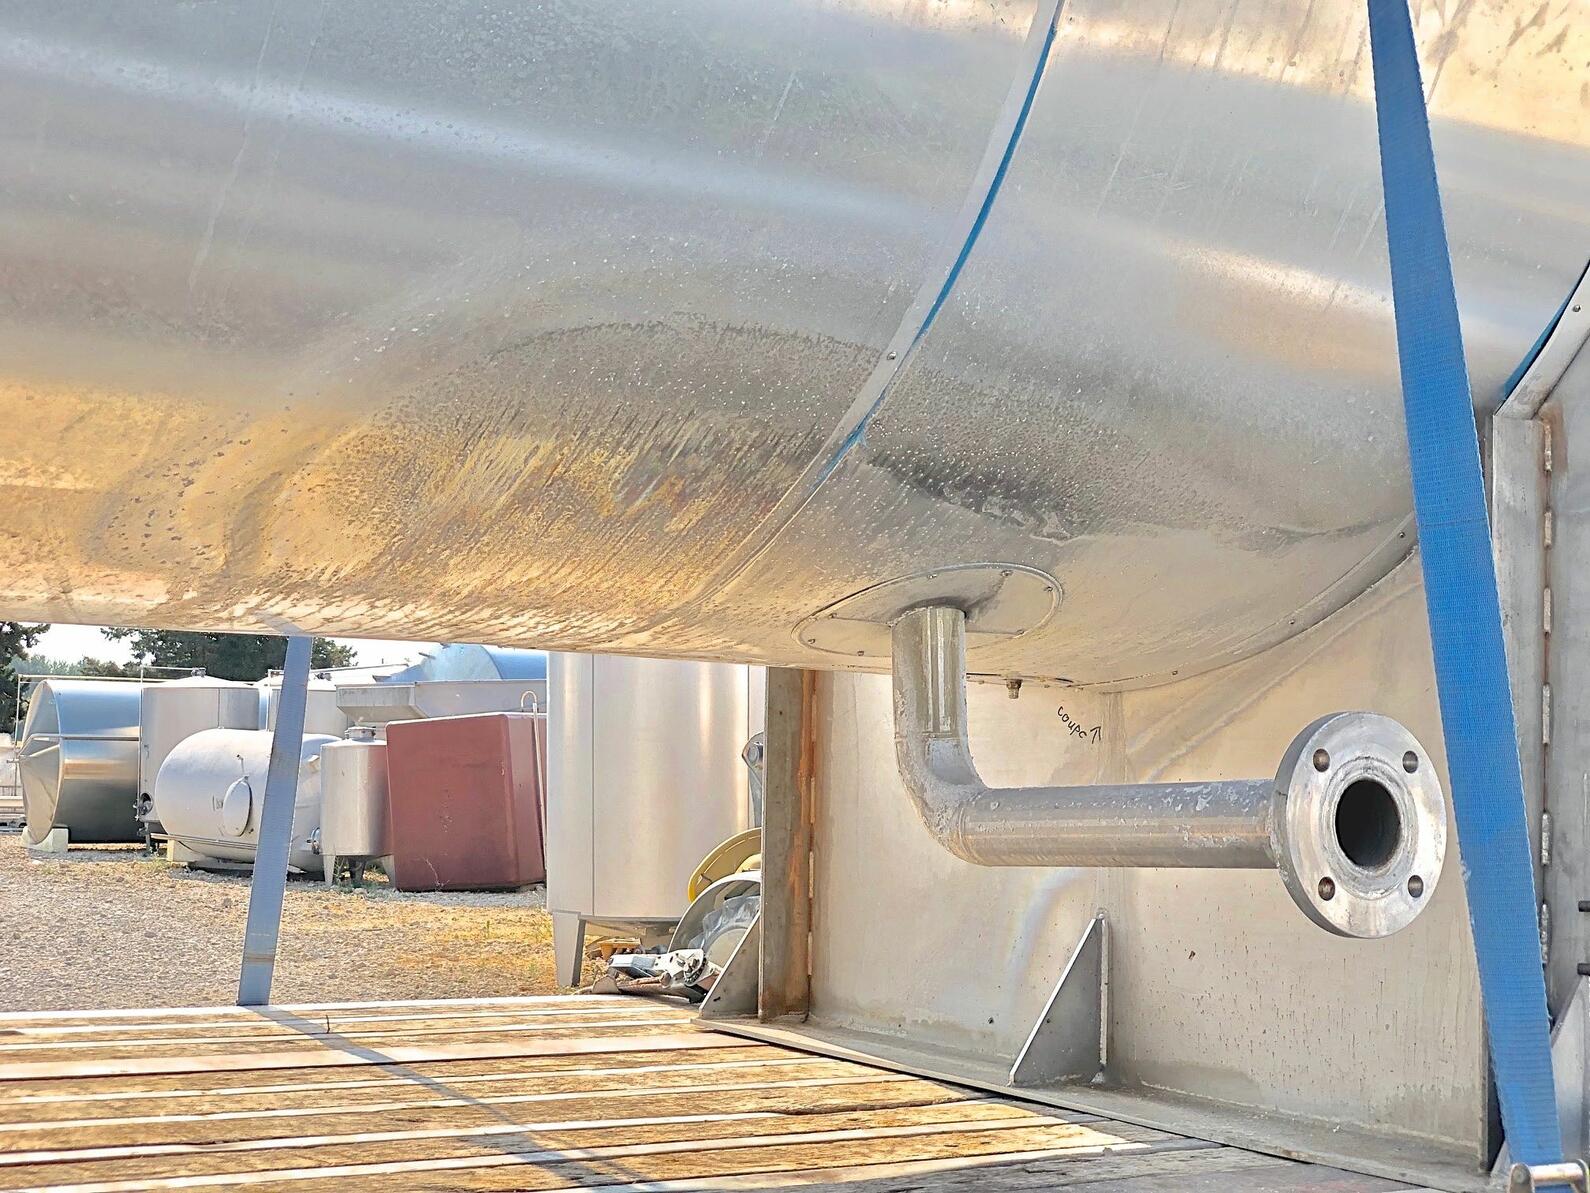 Insulated stainless steel storage tank